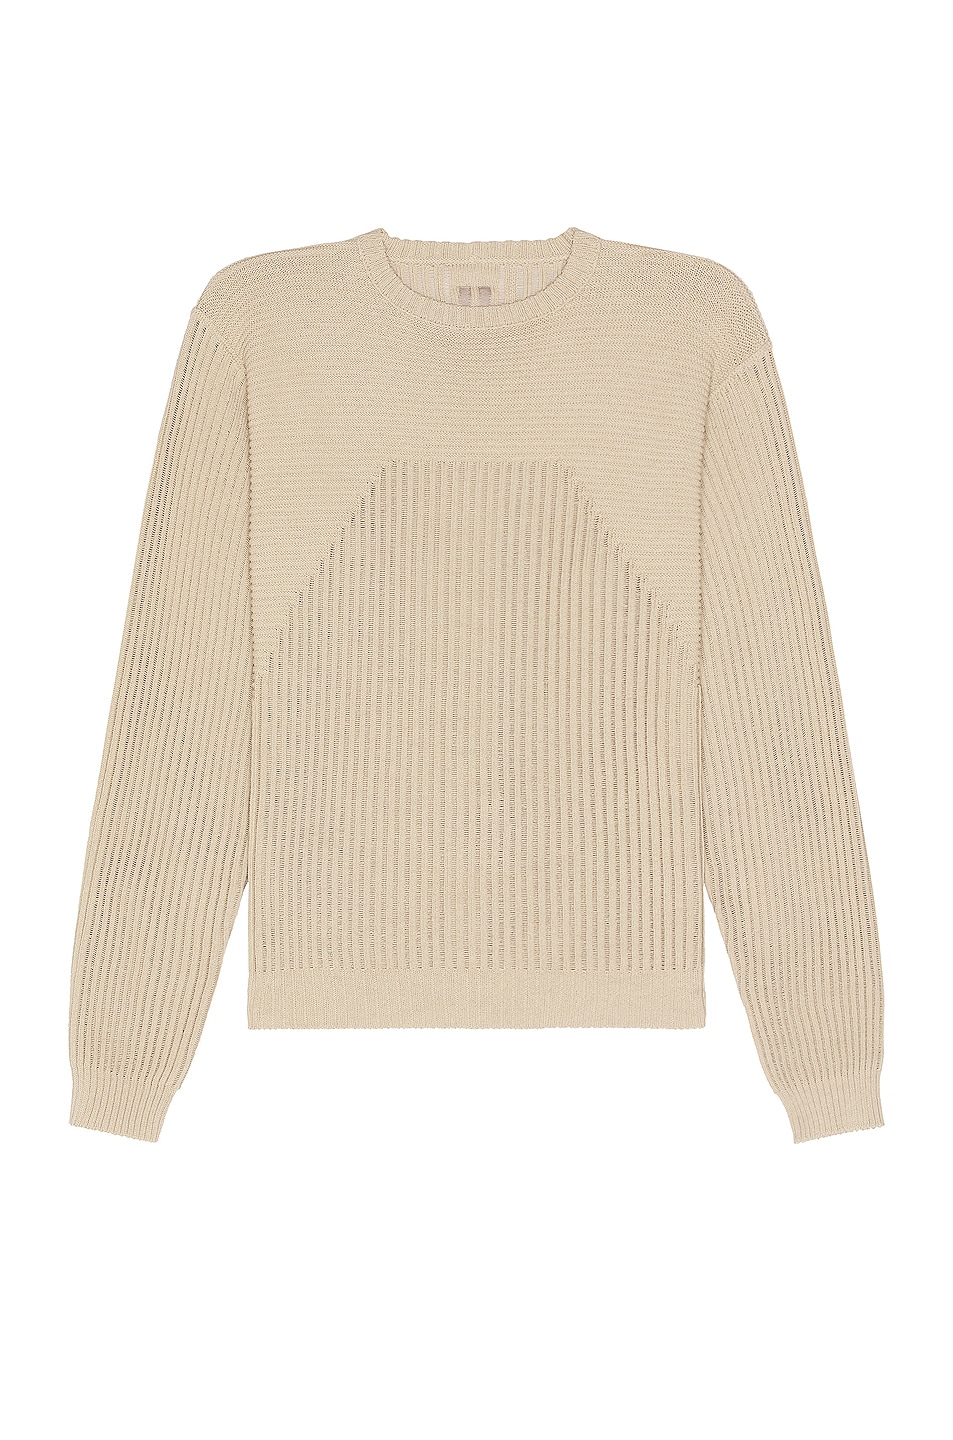 Image 1 of Rick Owens Biker Round Neck Sweater in Pearl